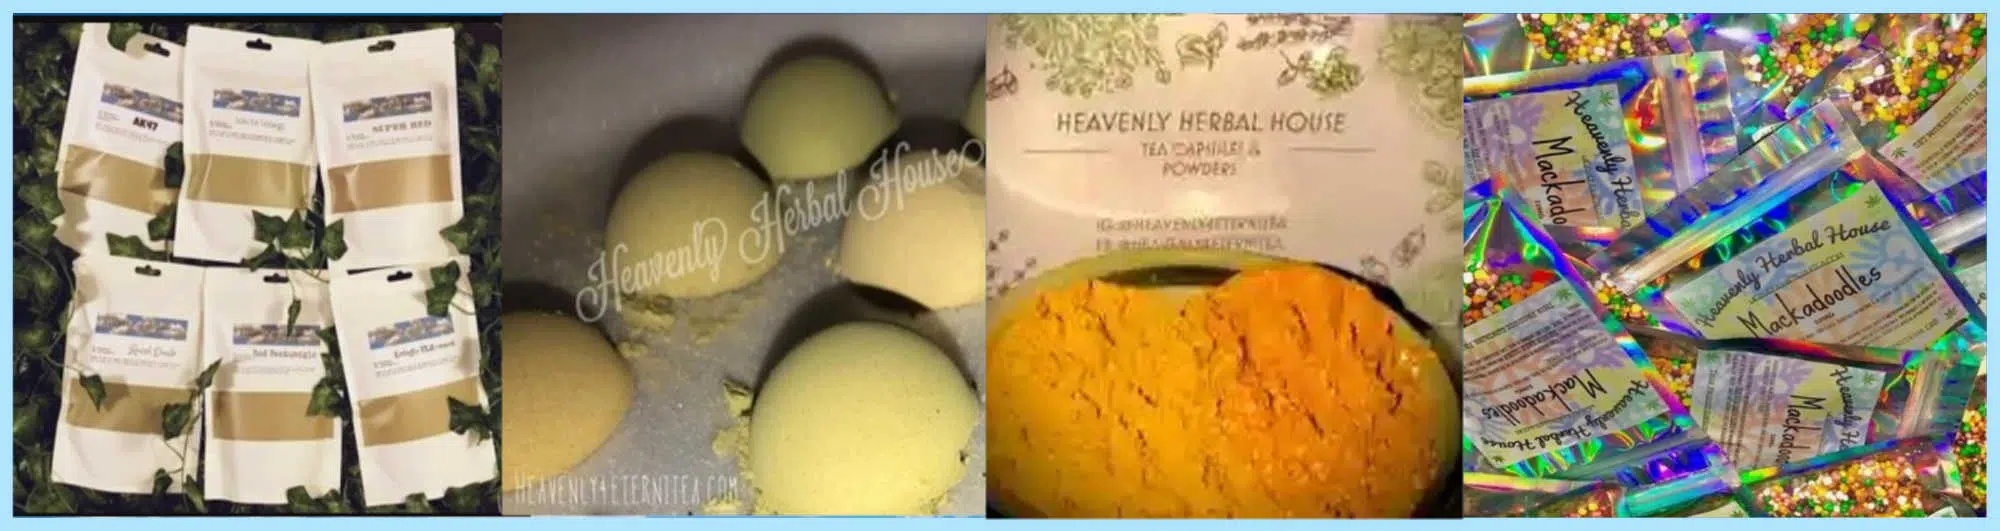 image of heavenly herbal house product